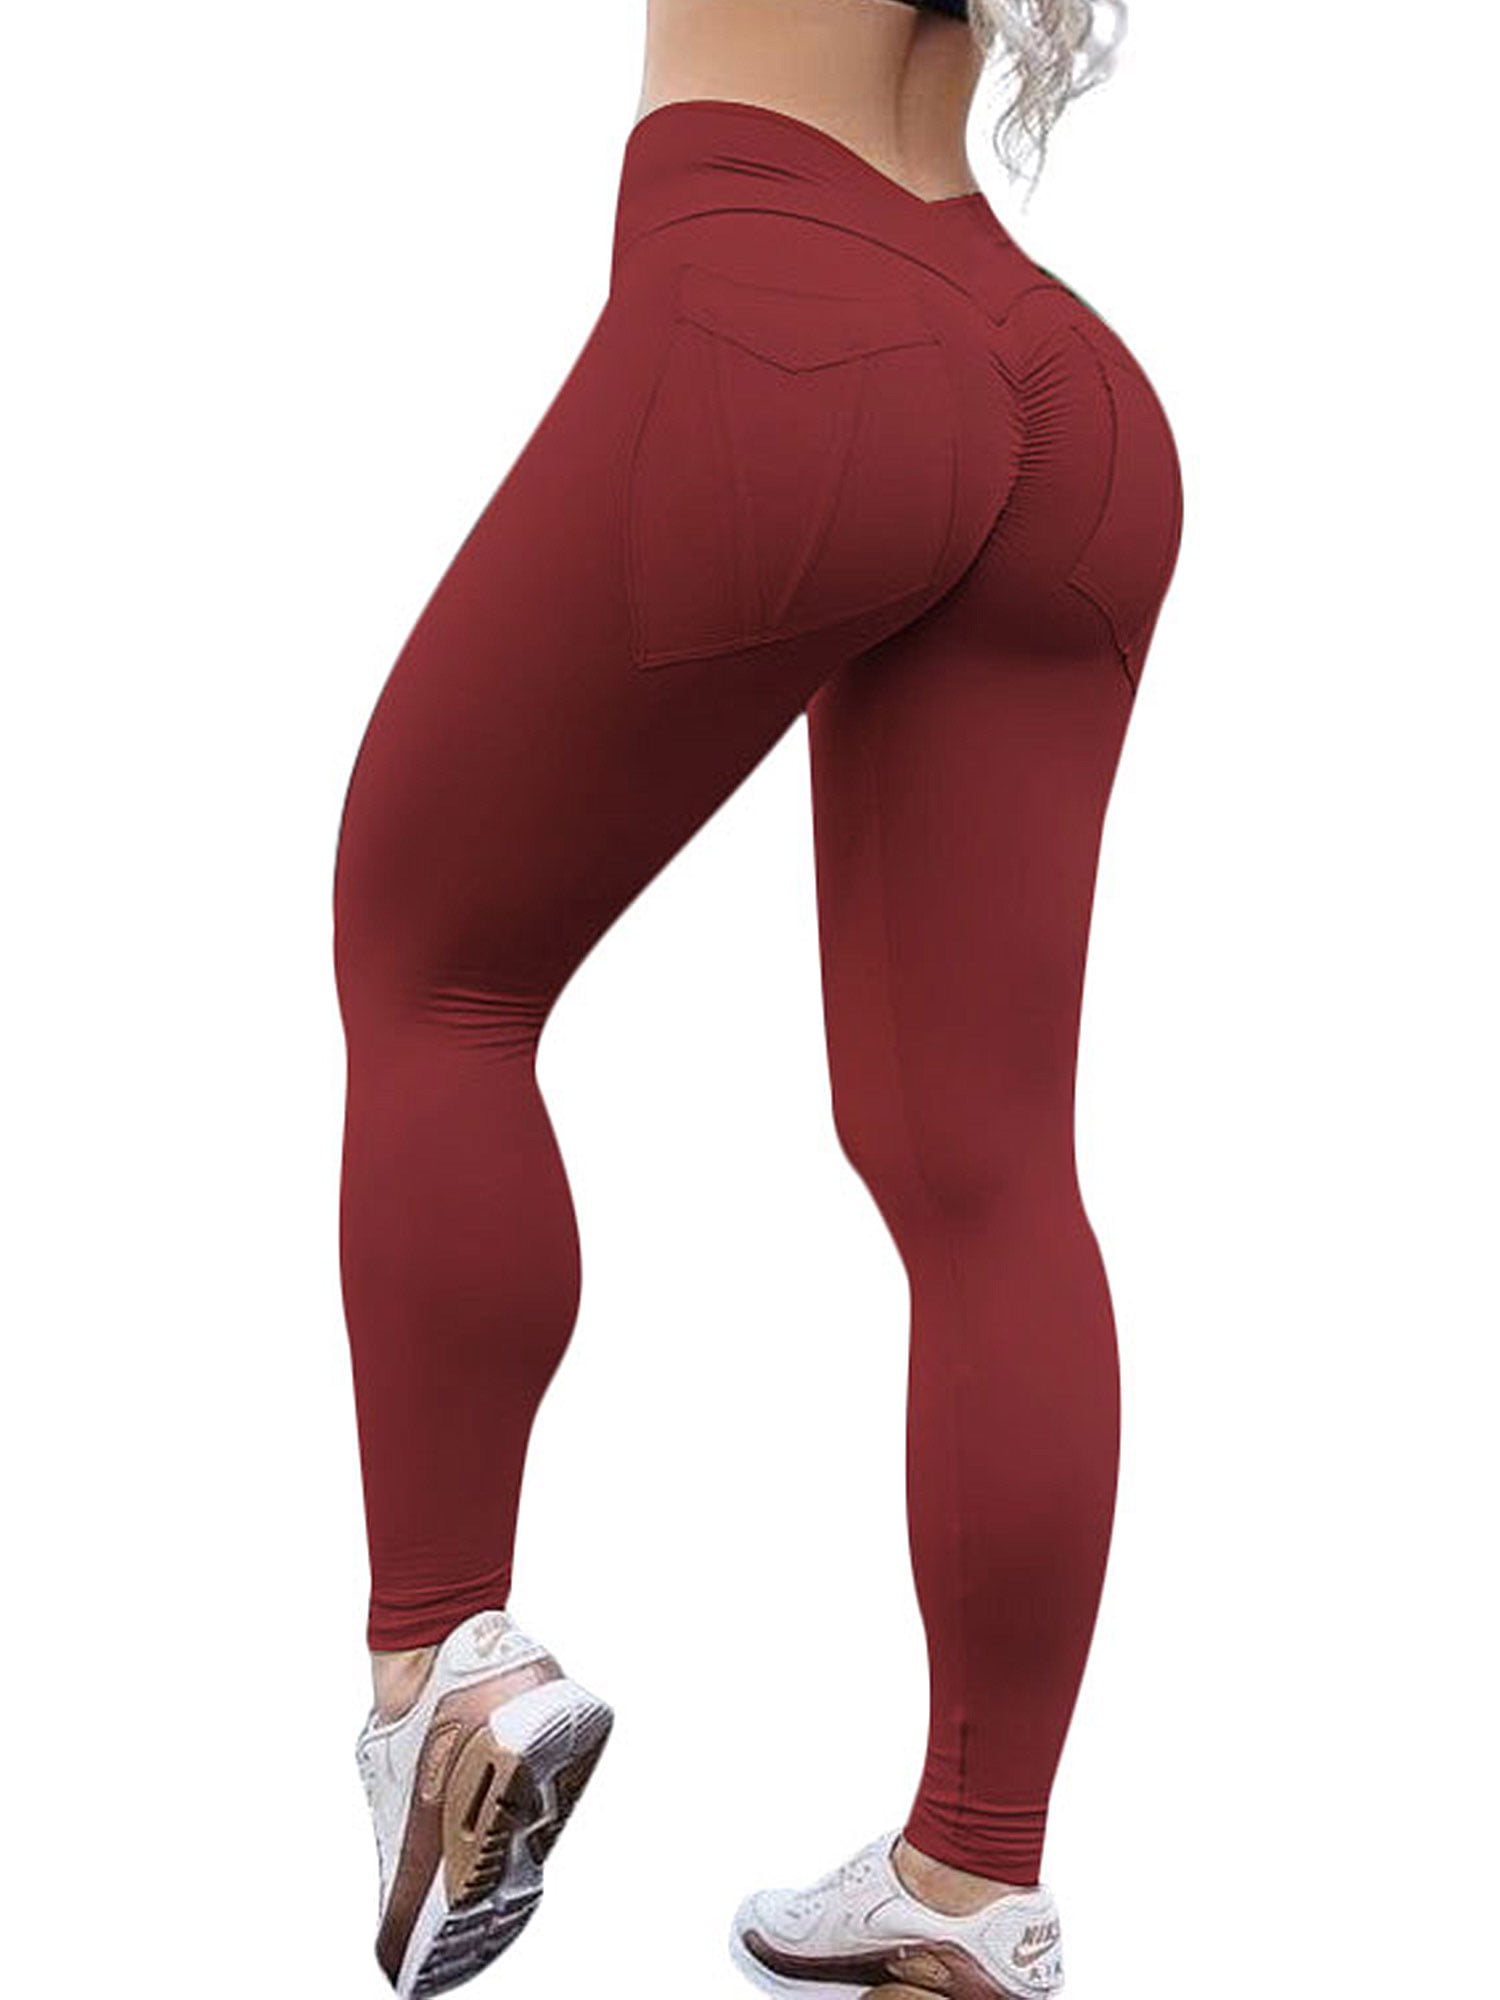 Details about   US Womens Yoga Leggings High Waist Stretch Running Sports Fitness Pants Trousers 